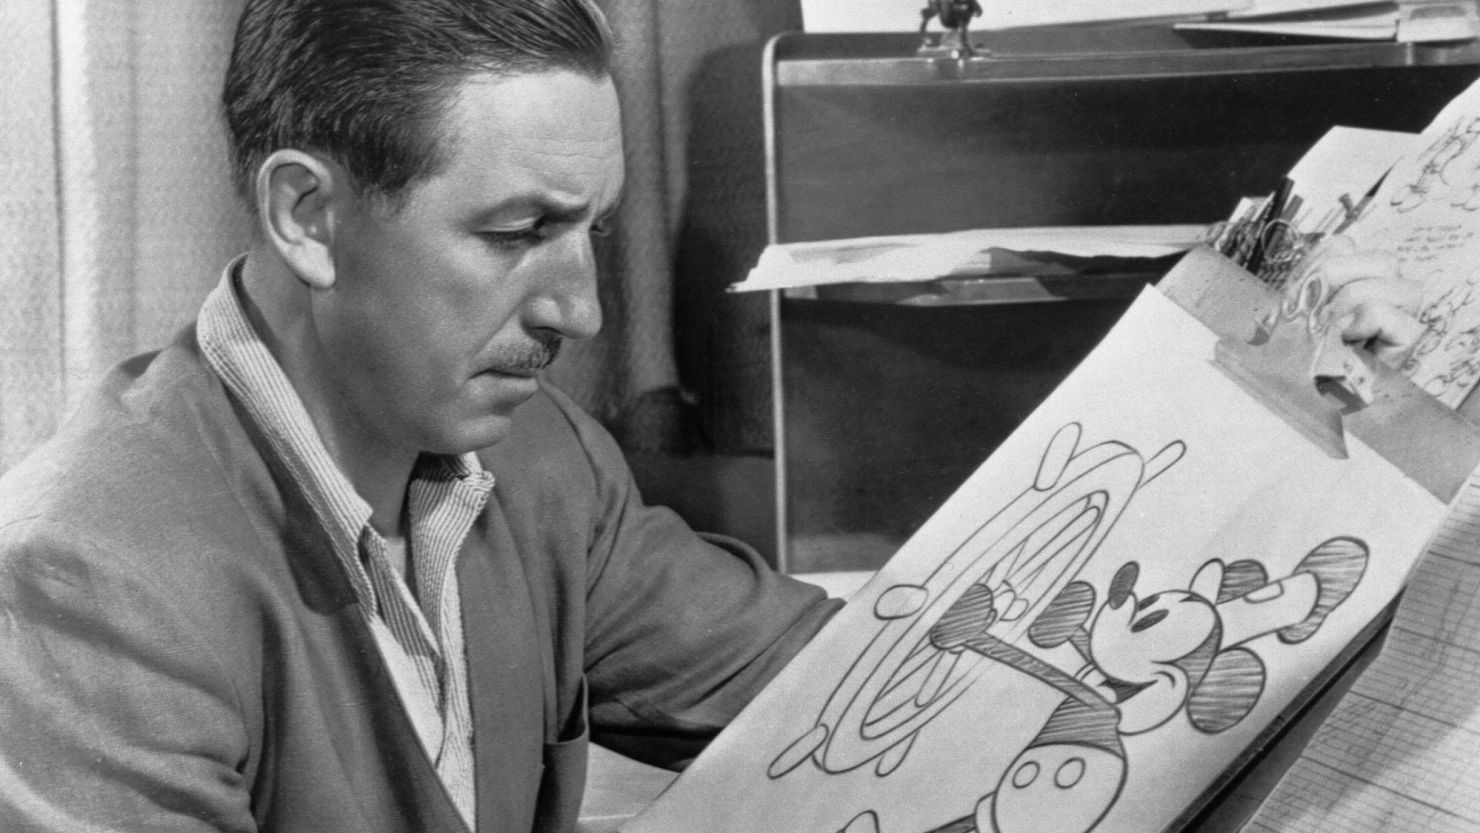 Mickey Mouse, the Original 1928 Version, Is Now In the Public Domain